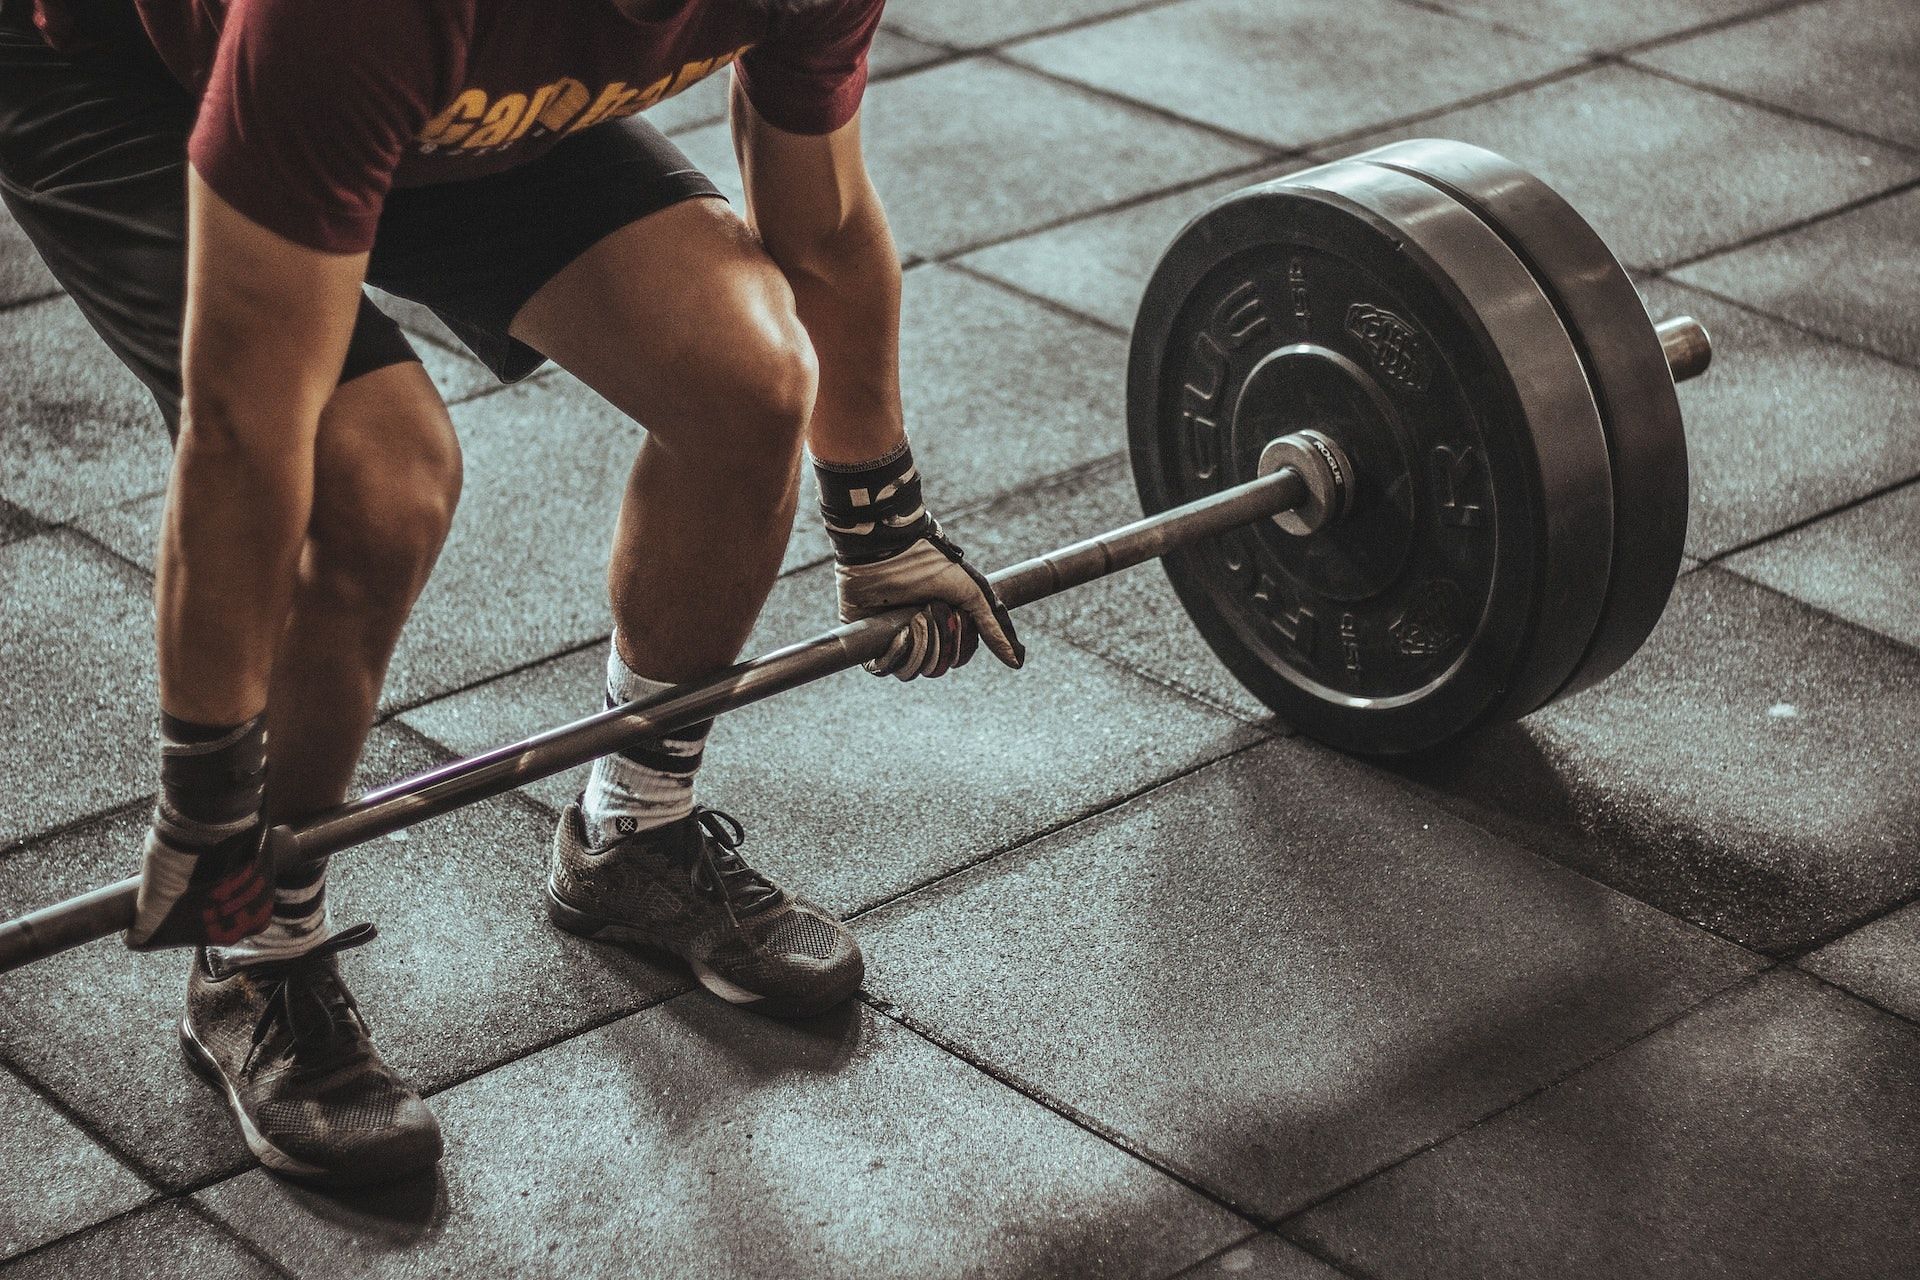 Deadlift is referred to as the King of the Lifts. (Photo via Pexels/Victor Freitas)